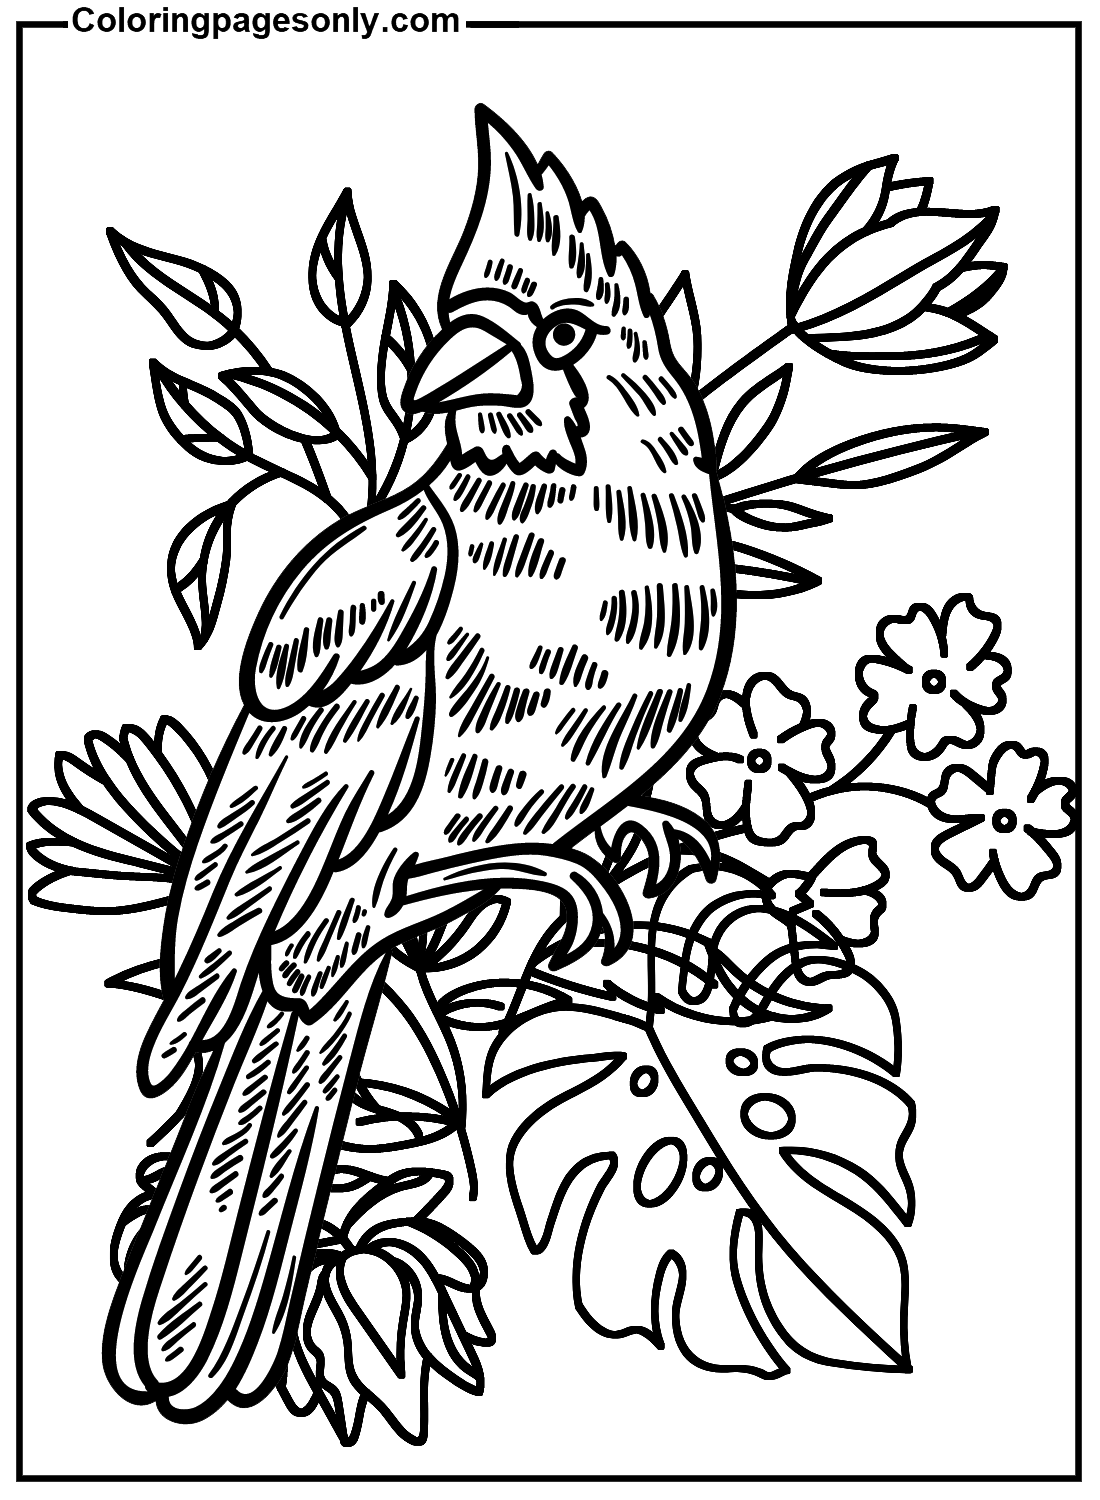 Cardinal with Flower Coloring Page